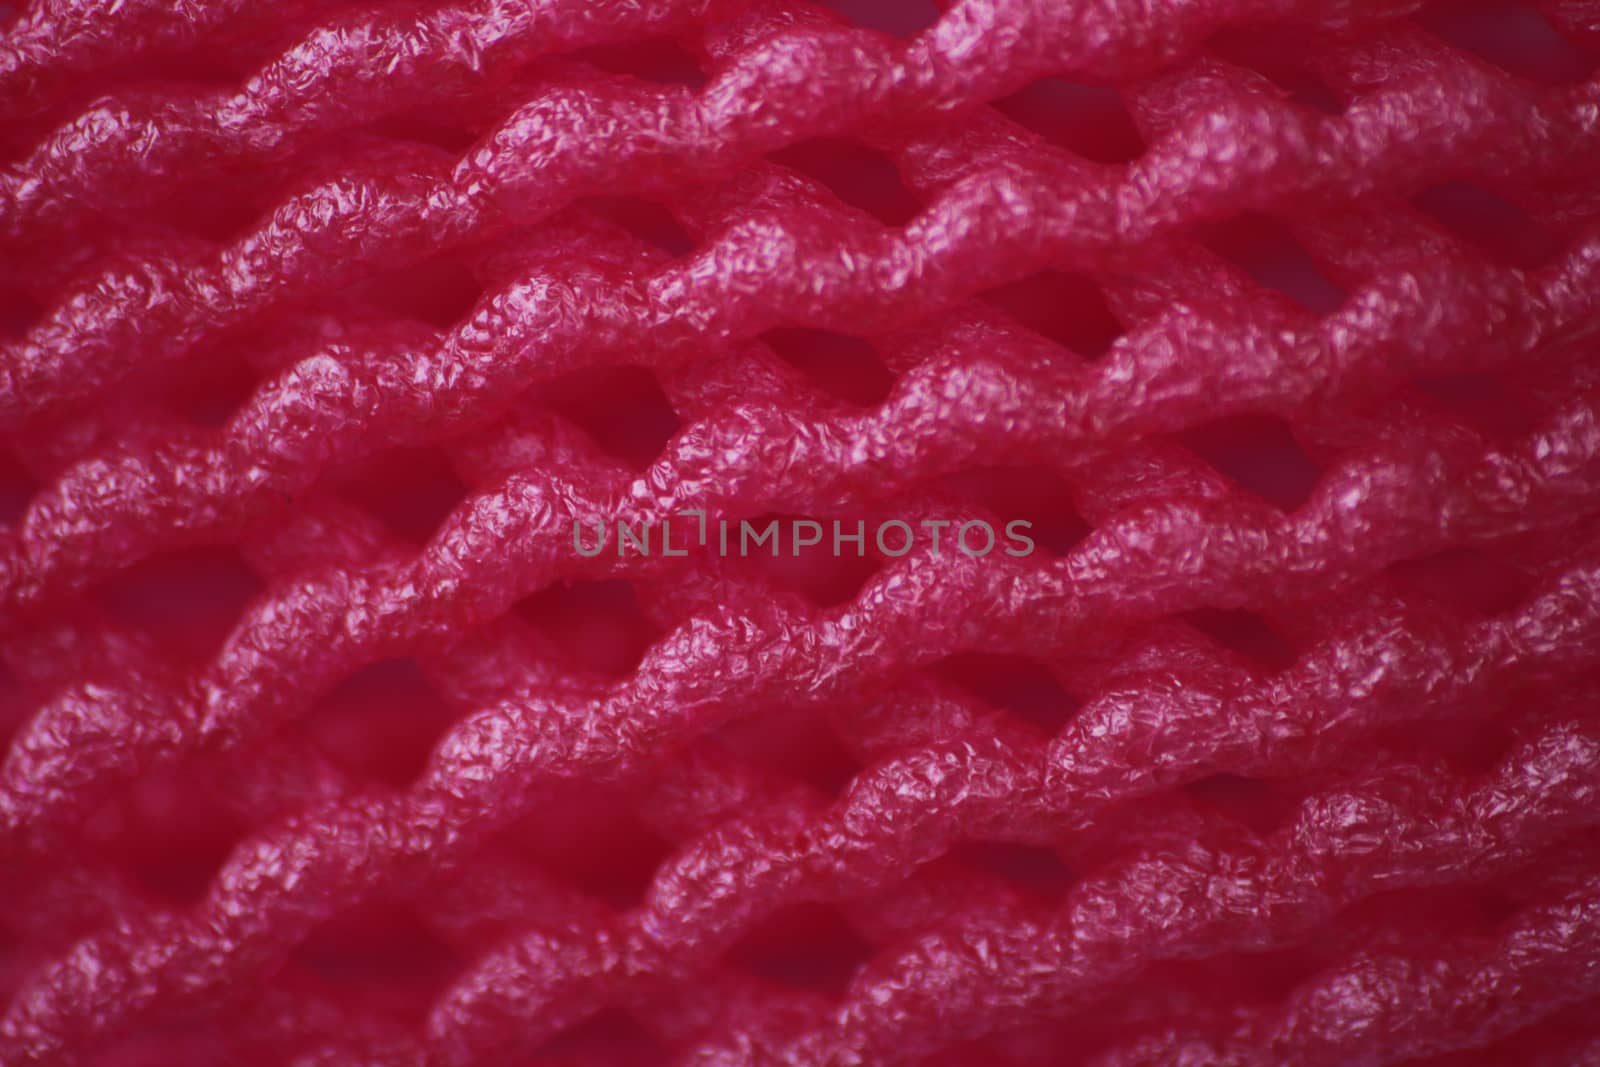 The pink shockproof net foam use for prevent fruit from bumping.